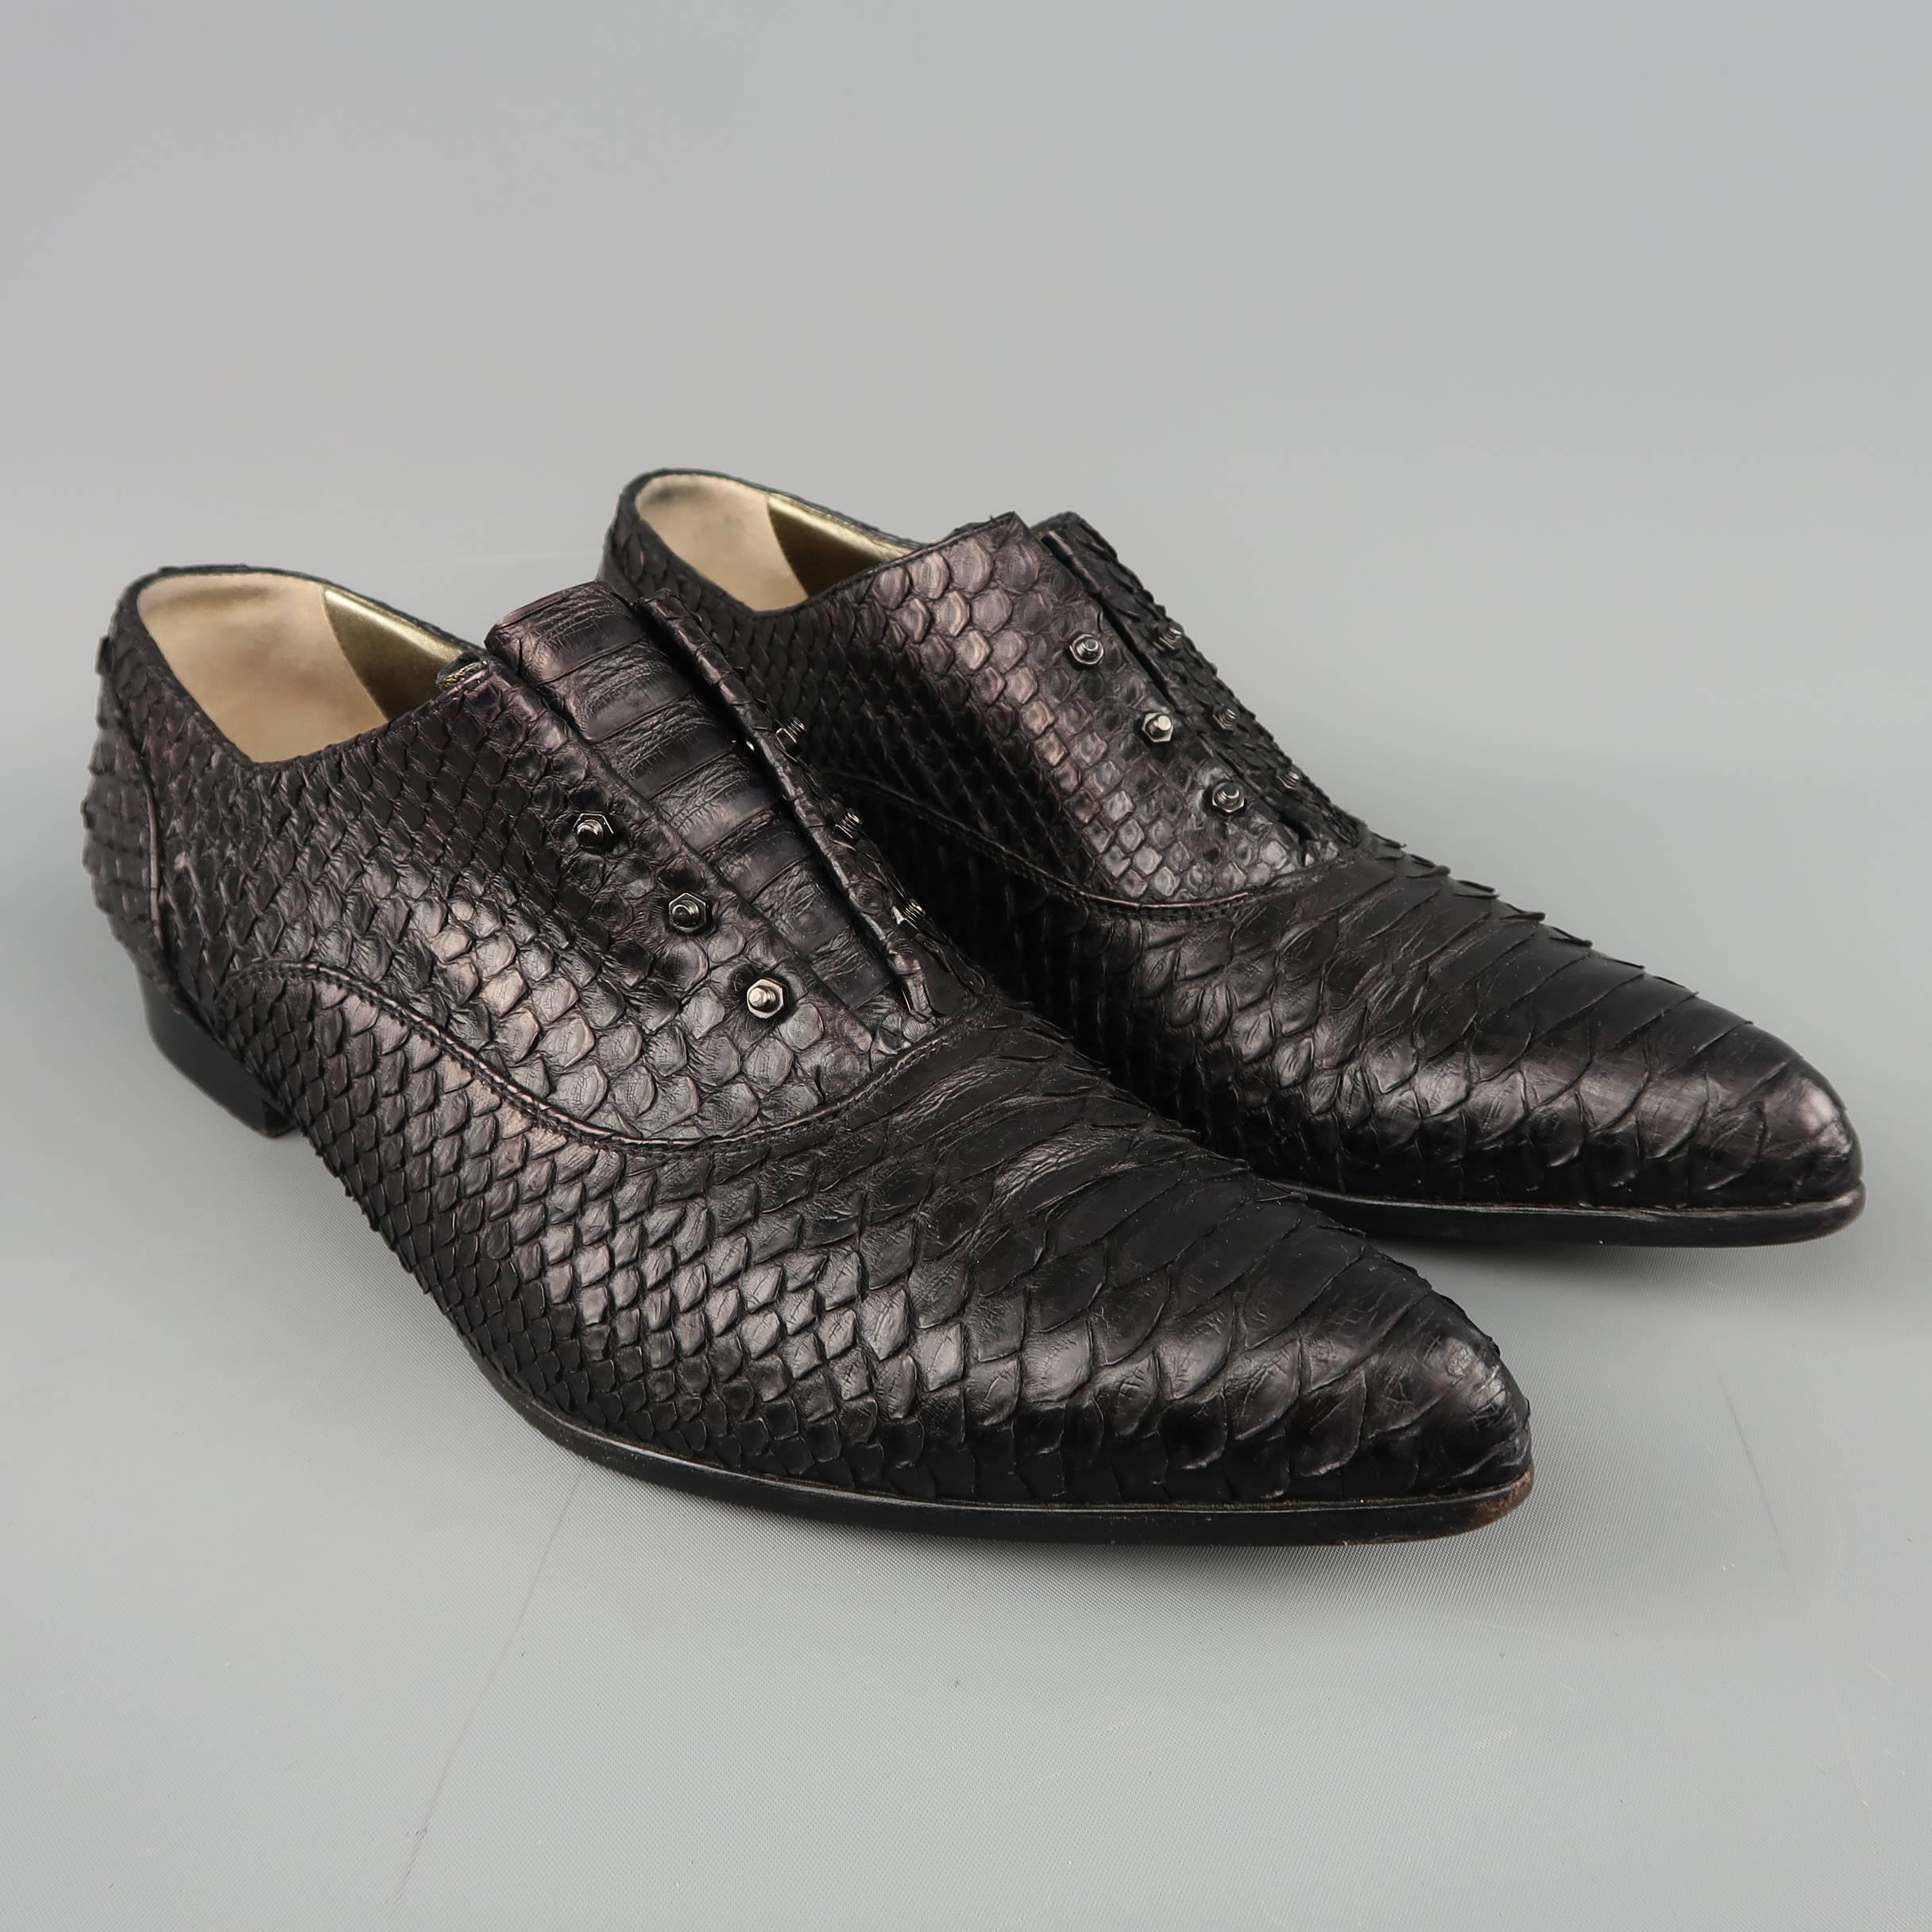 LANVIN oxfords come in black snakeskin leather with a pointed toe, gold liner, and slip on elastic closure with screw details. Made in Italy.
 
Good Pre-Owned Condition.
Marked: IT 42
 
Measurements:
 
Outsole: 11.75 x 4.75 in.